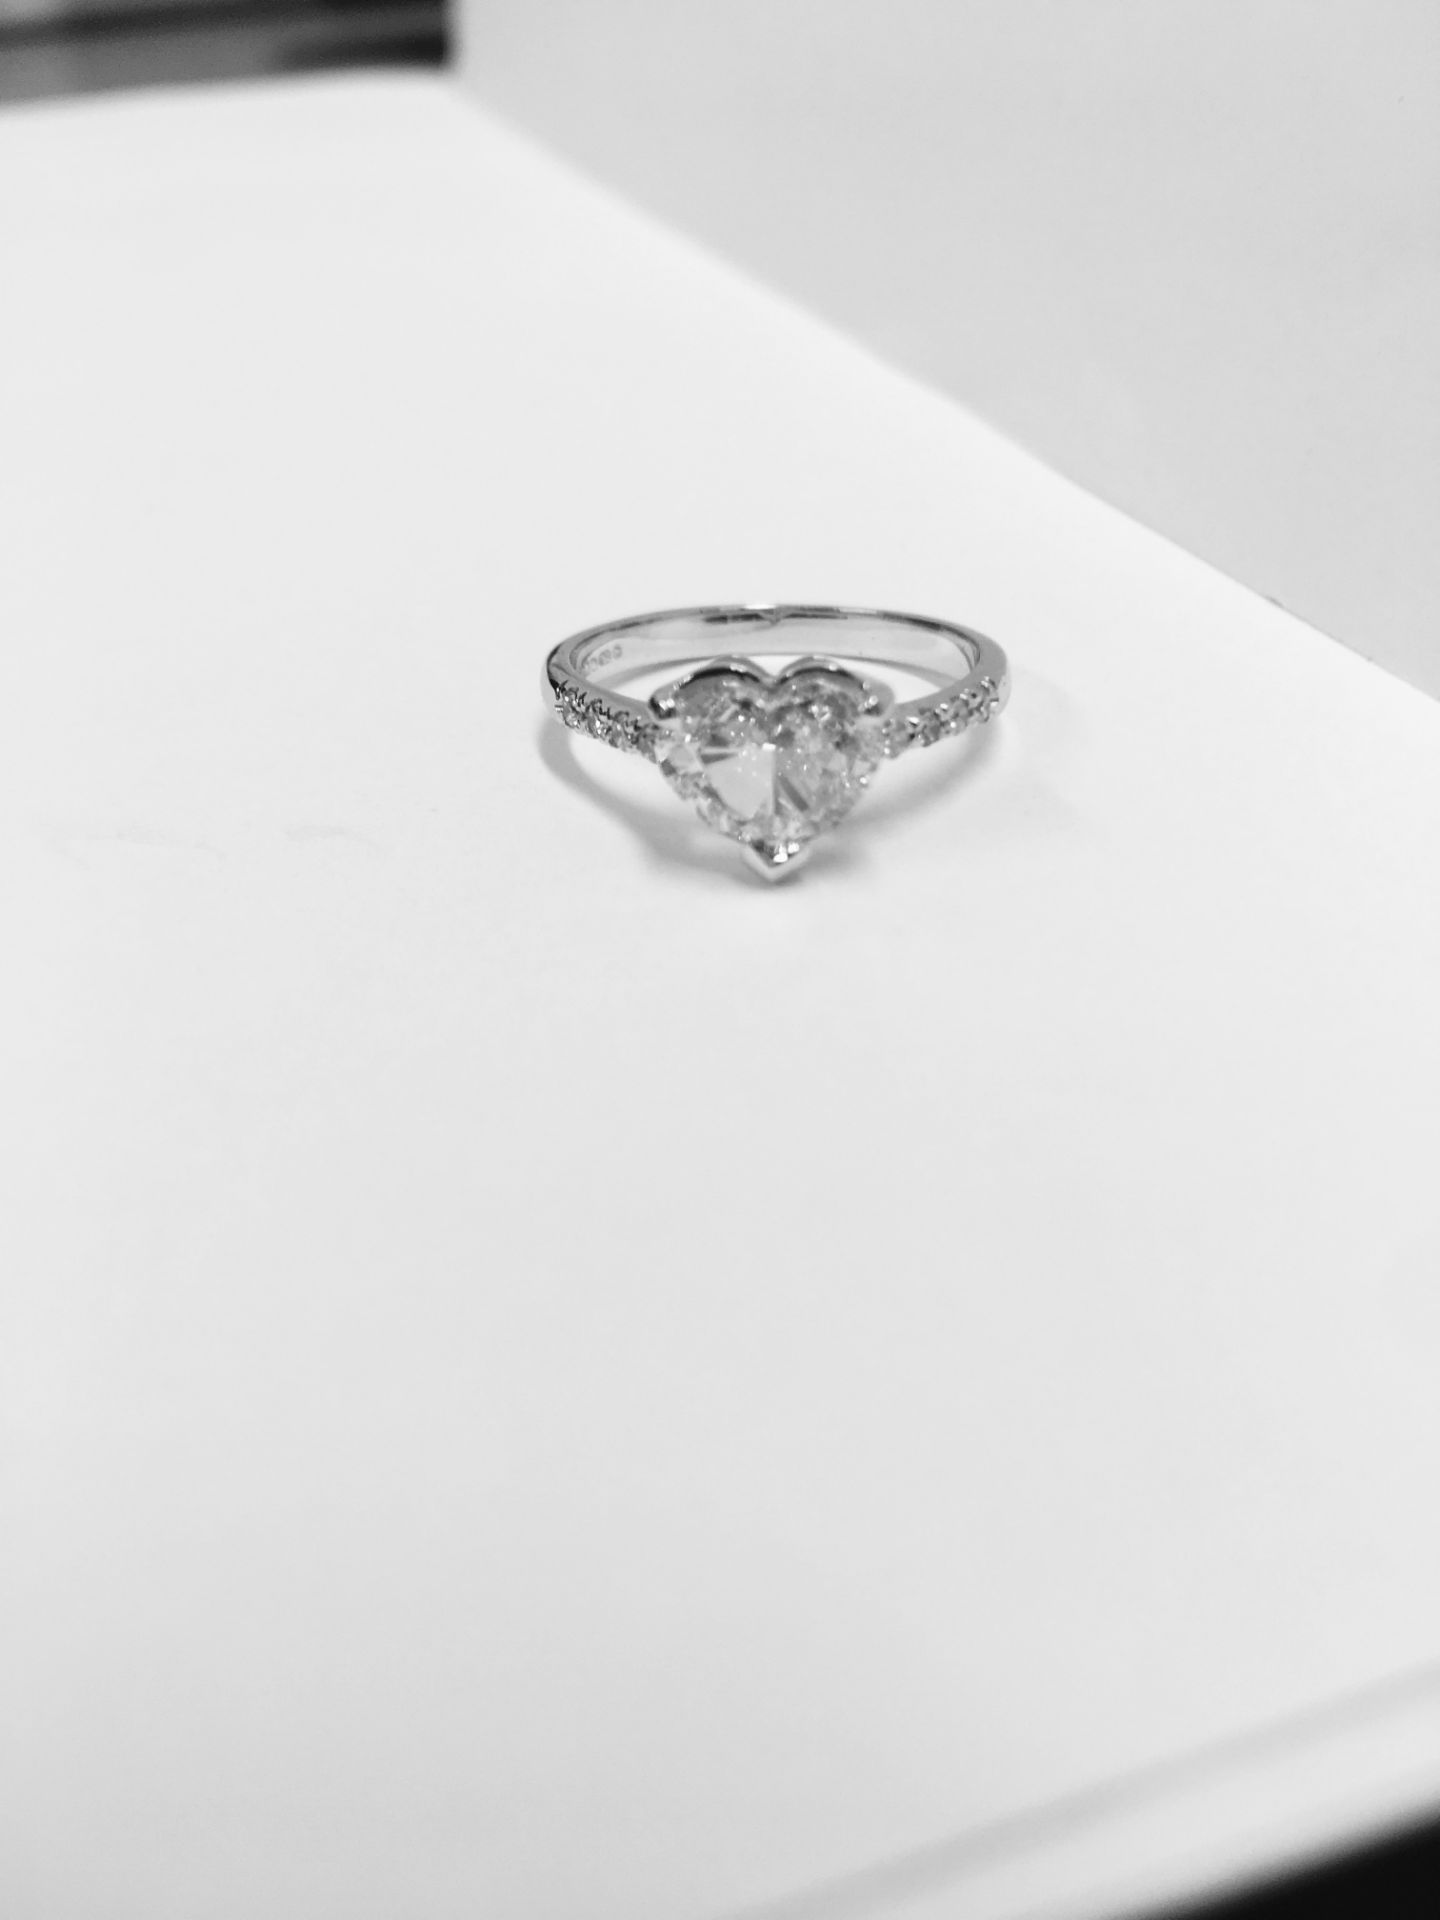 1Ct Heart Shape Diamond Solitaire Ring,